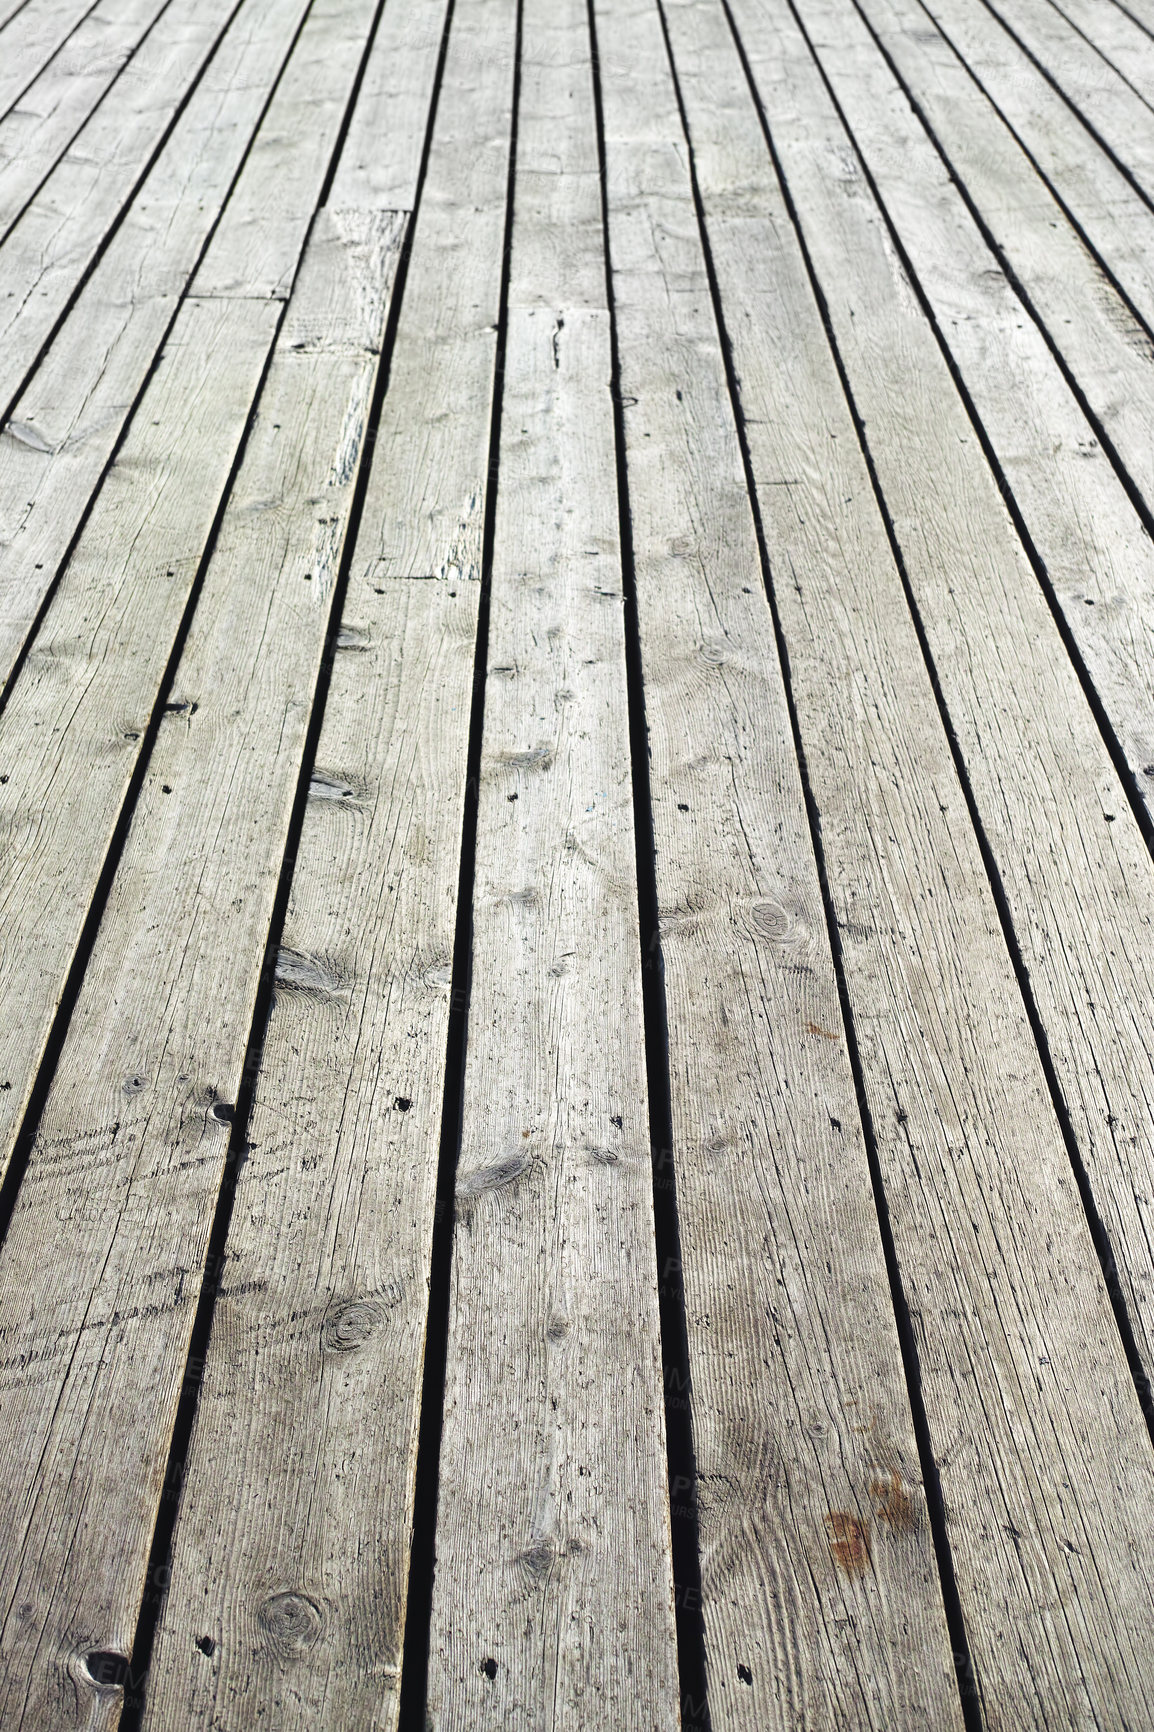 Buy stock photo Closeup of a wooden plank surface. Light grey vintage flooring with slats forming an outdoor terrace. Old textures of hard wood floor used as a walkway or deck. Long vertical outdoor floorboards